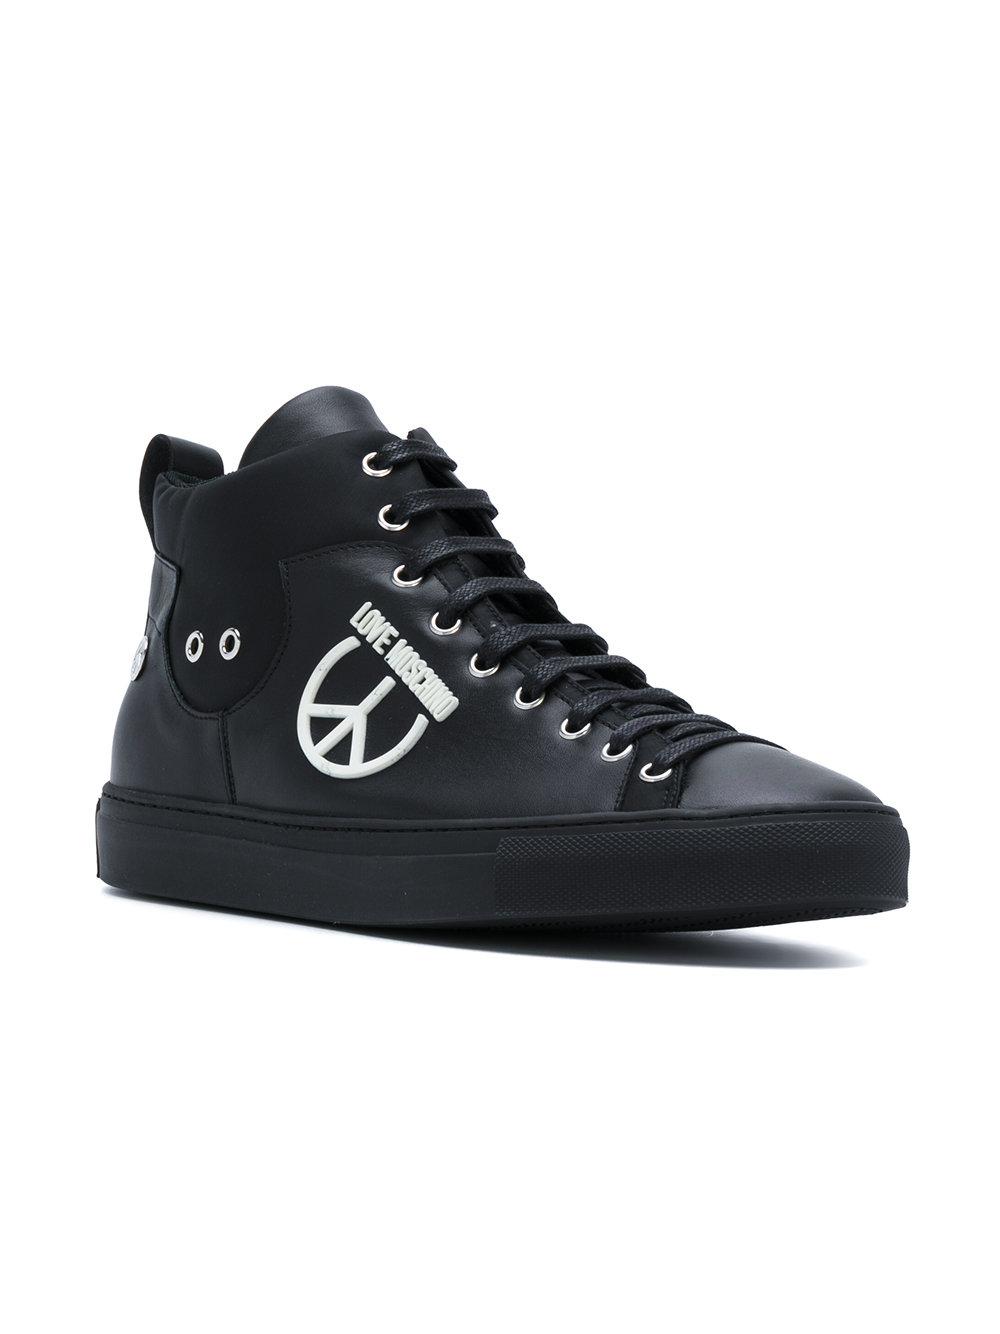 Lyst - Love Moschino Peace Hi-top Sneakers in Black for Men